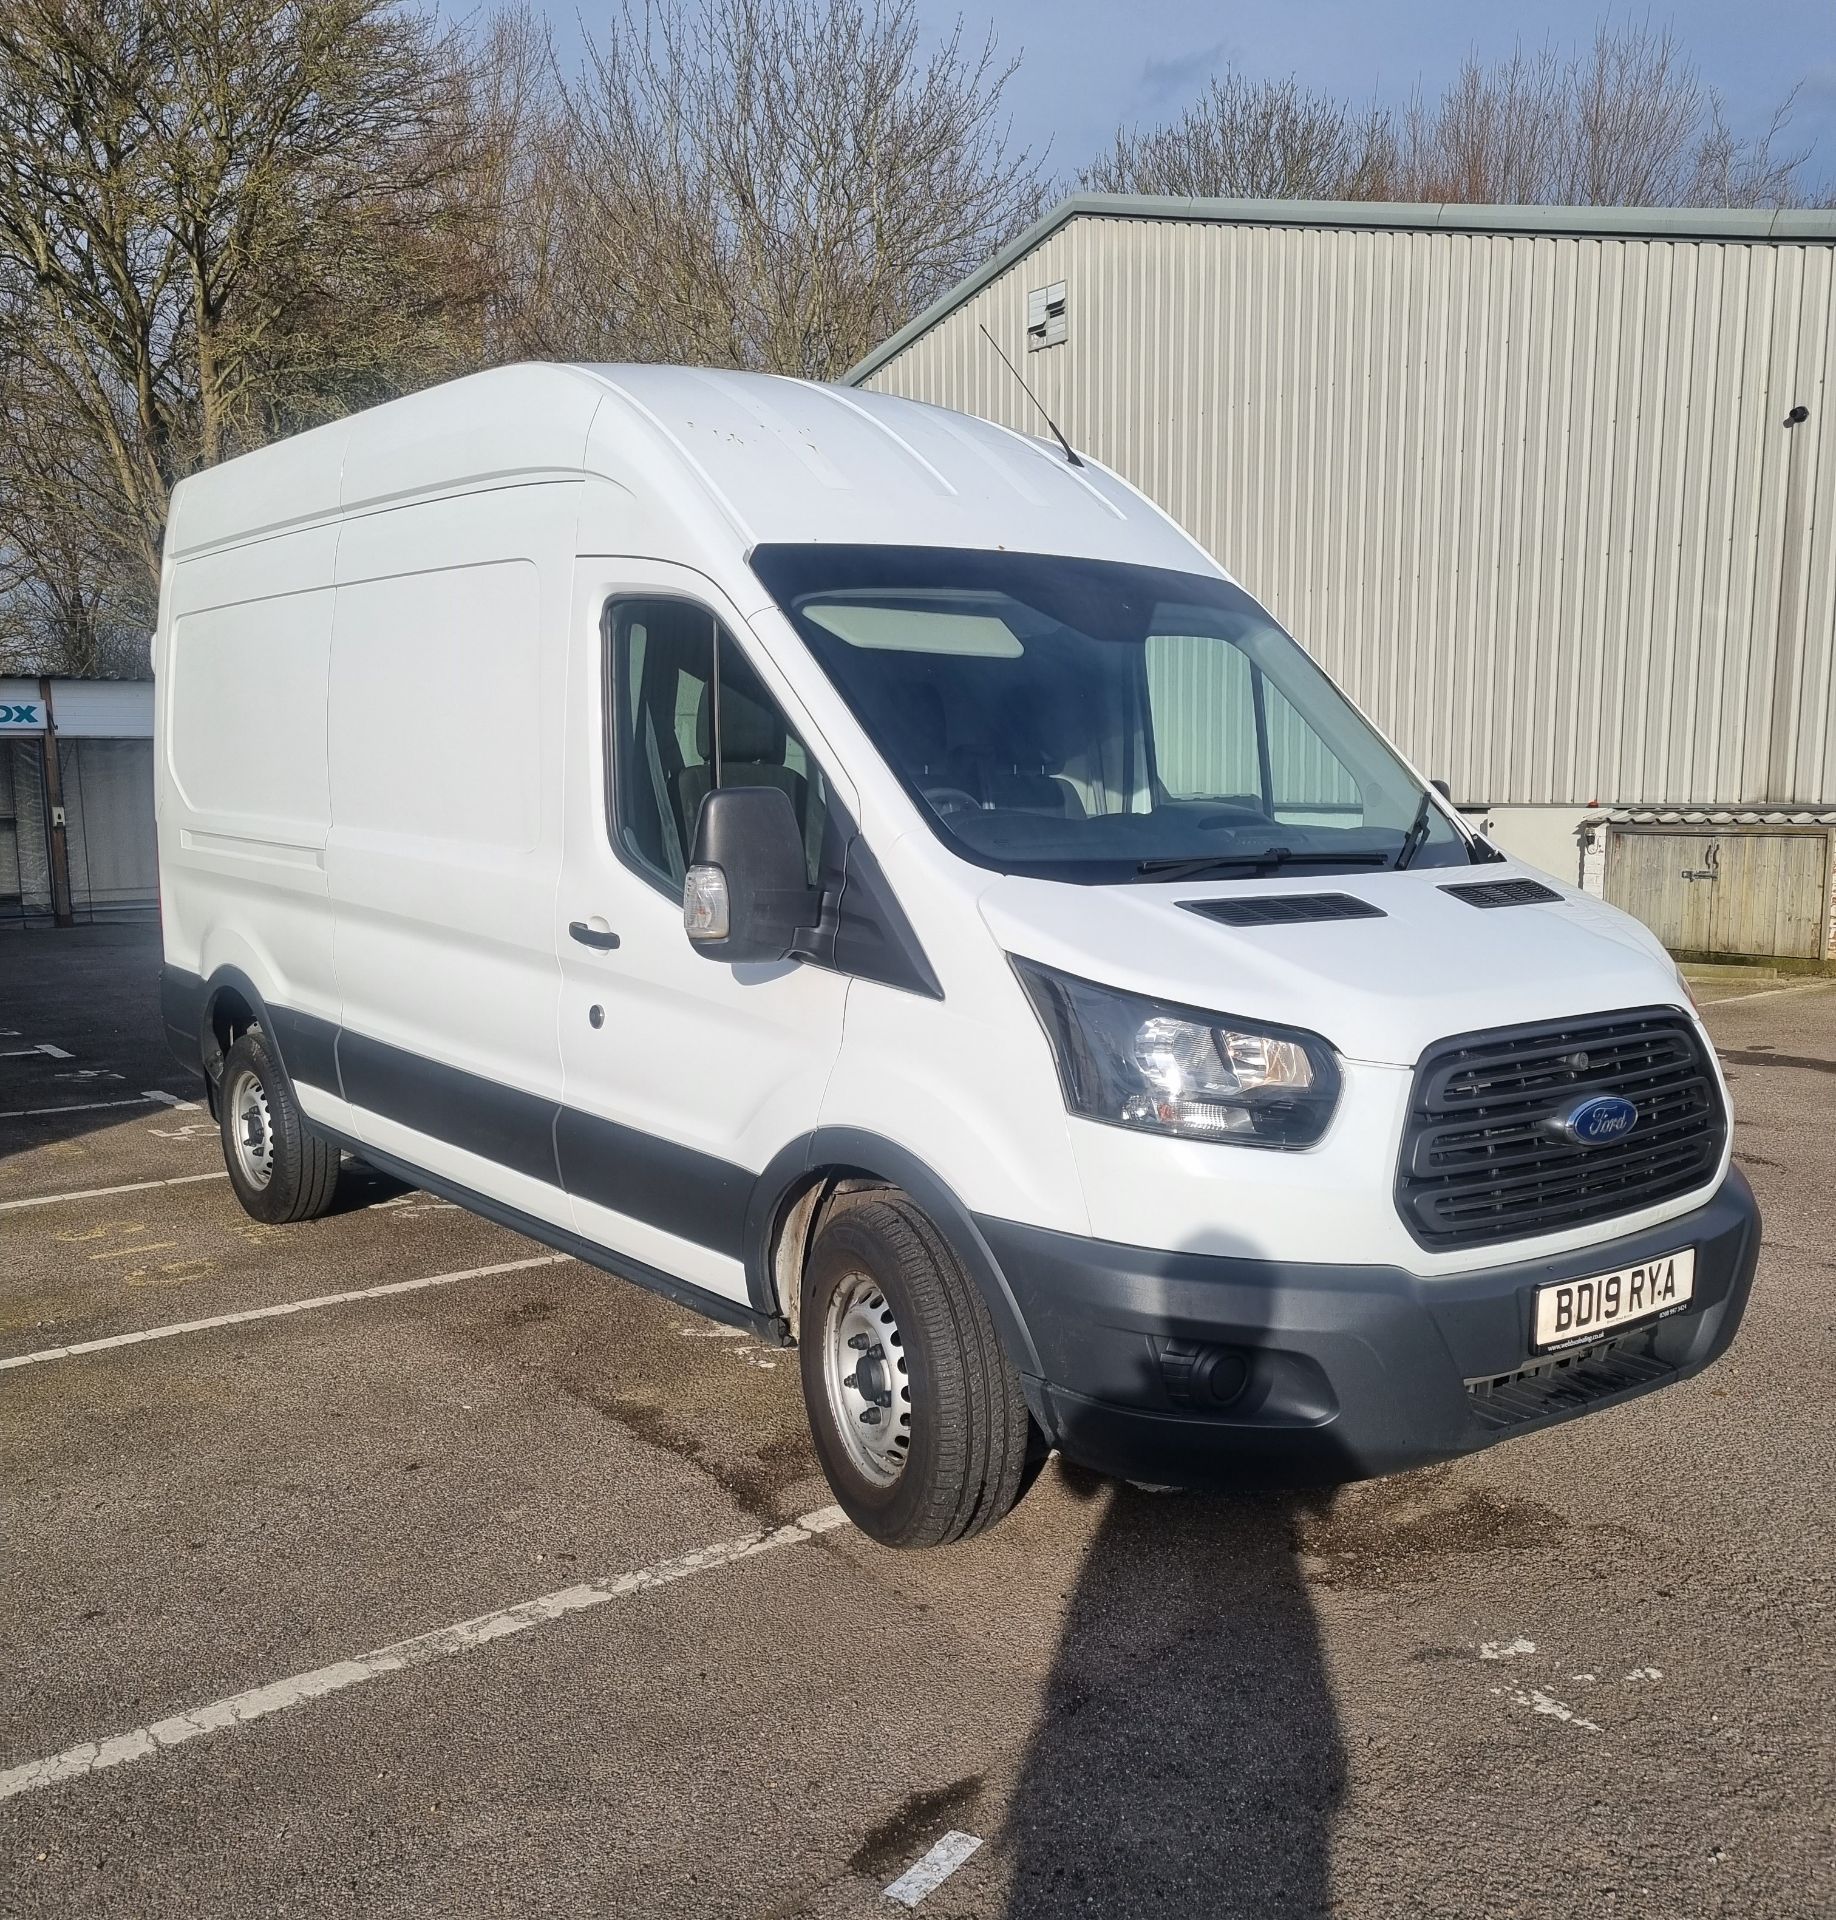 2019 FORD TRANSIT PANEL VAN - 99,507 MILES - SERVICED REGULARLY - READY FOR WORK